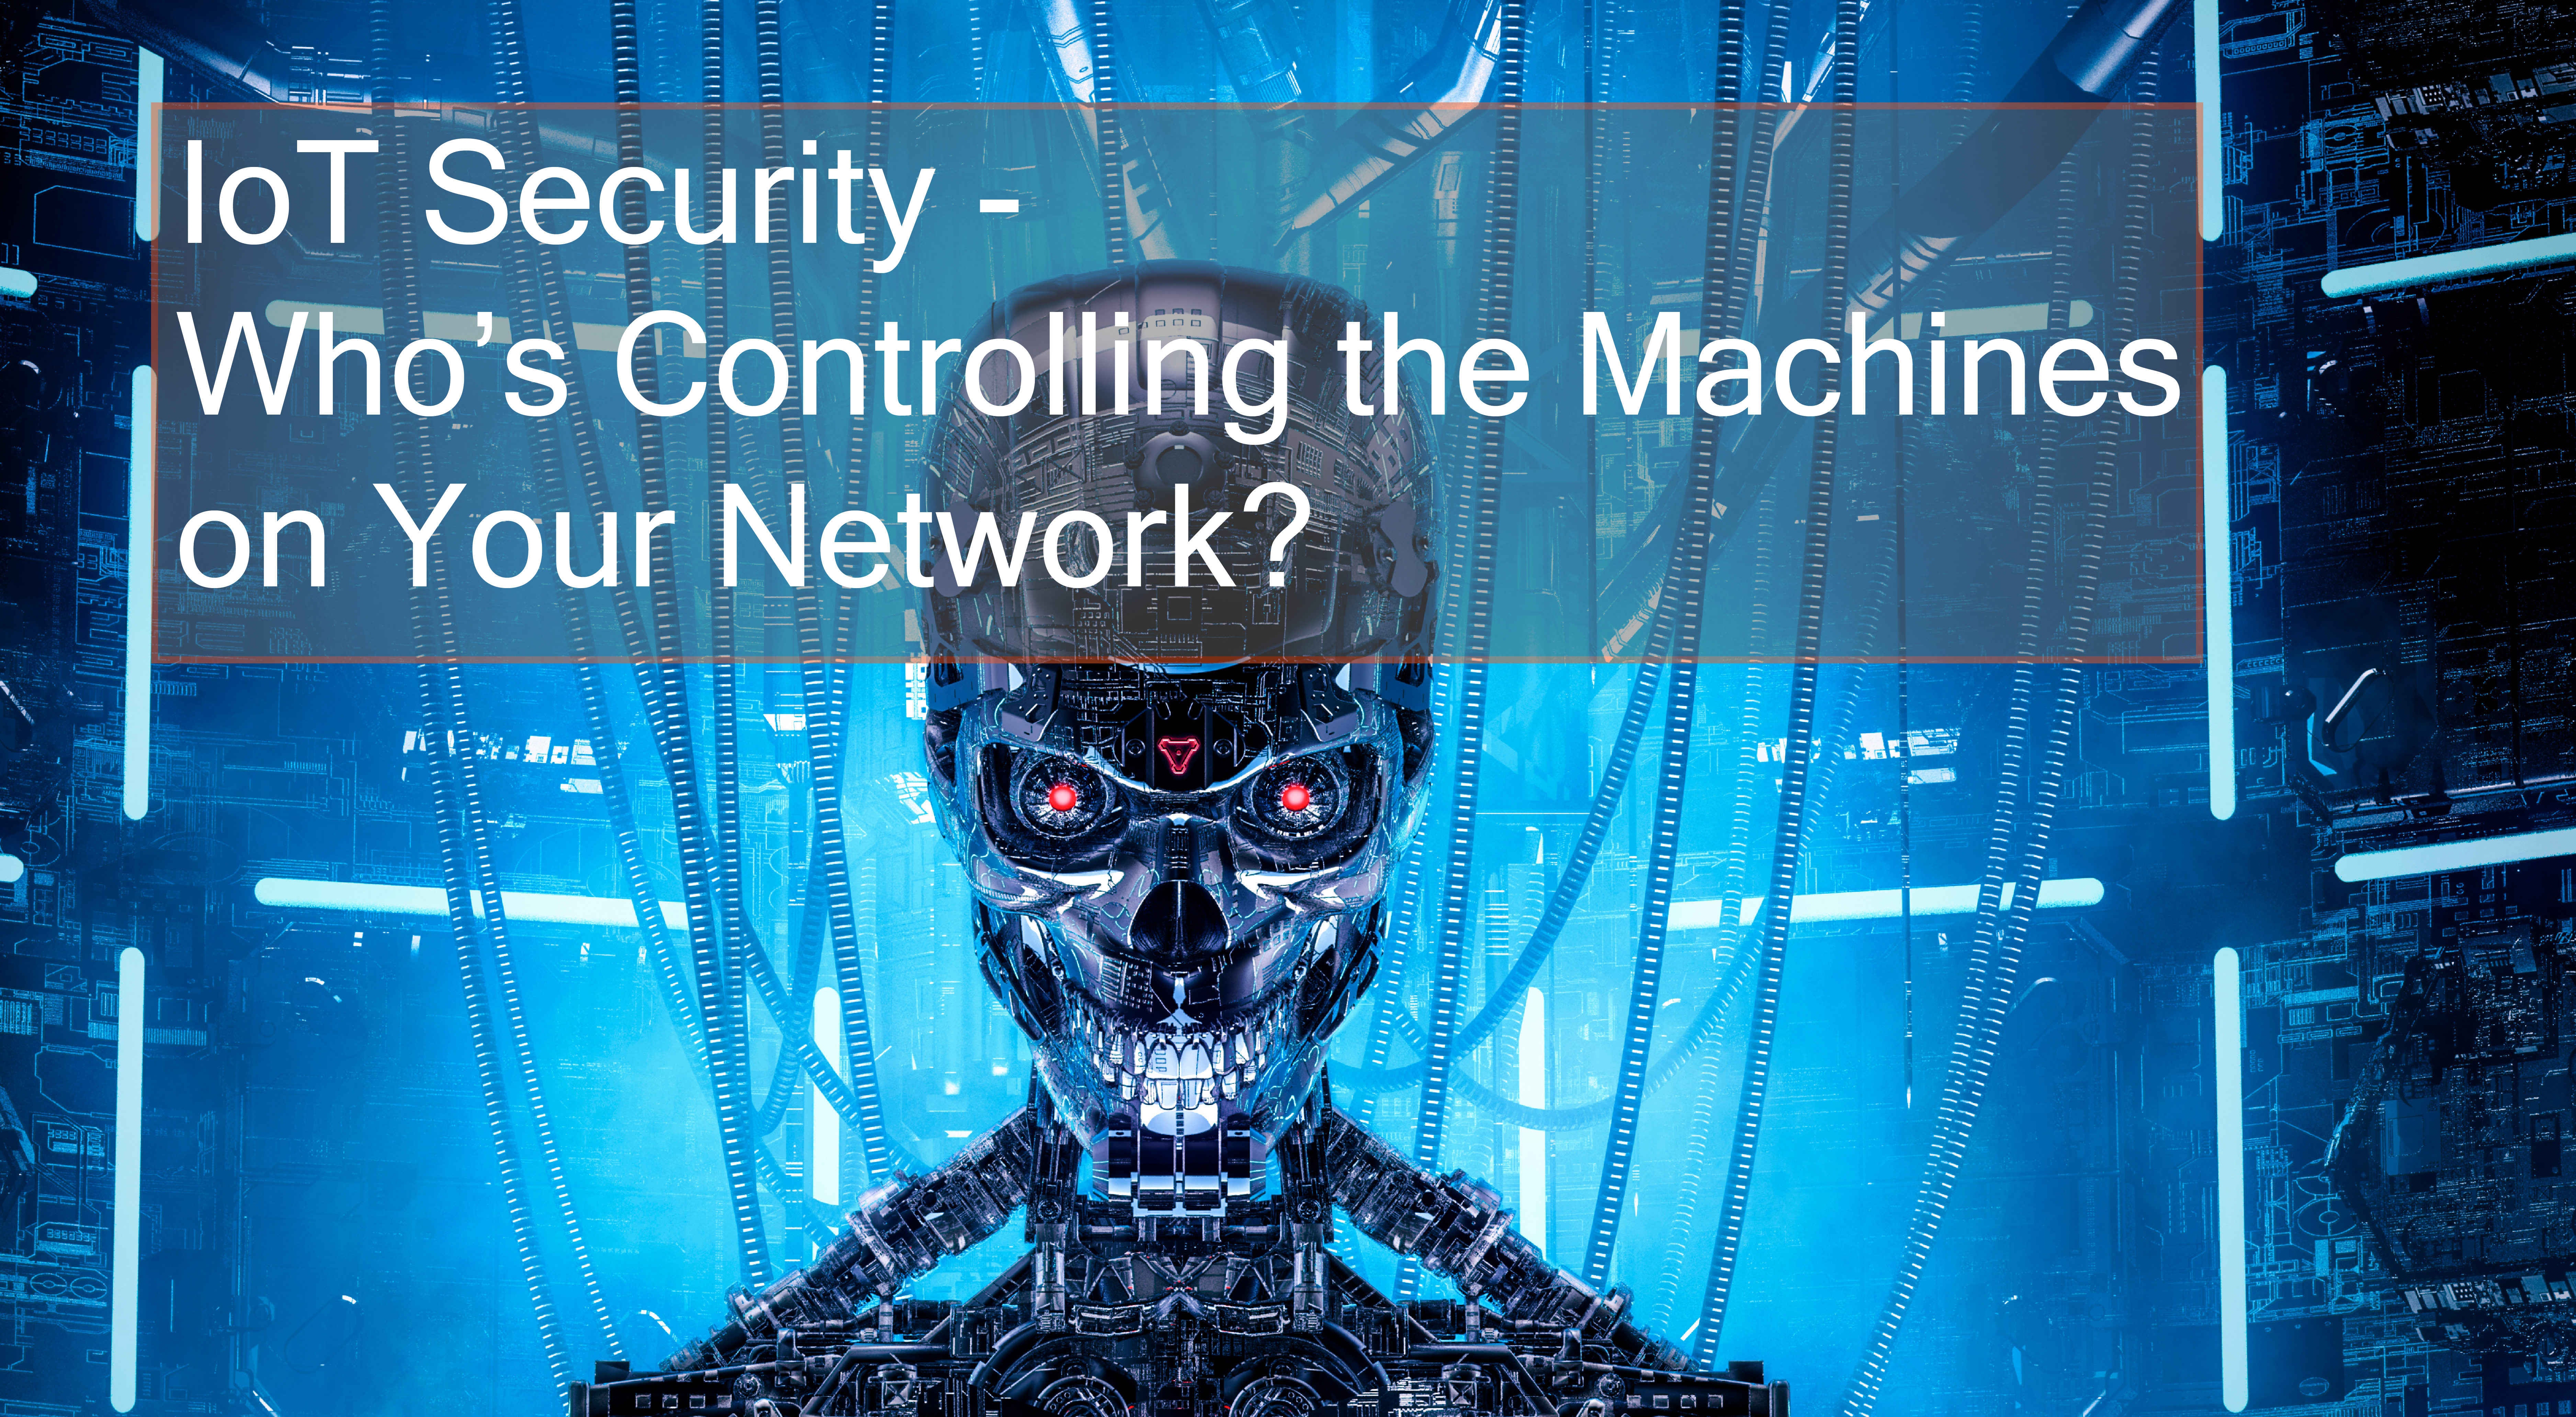 IoT Security –Who’s Controlling the Machines on Your Network?